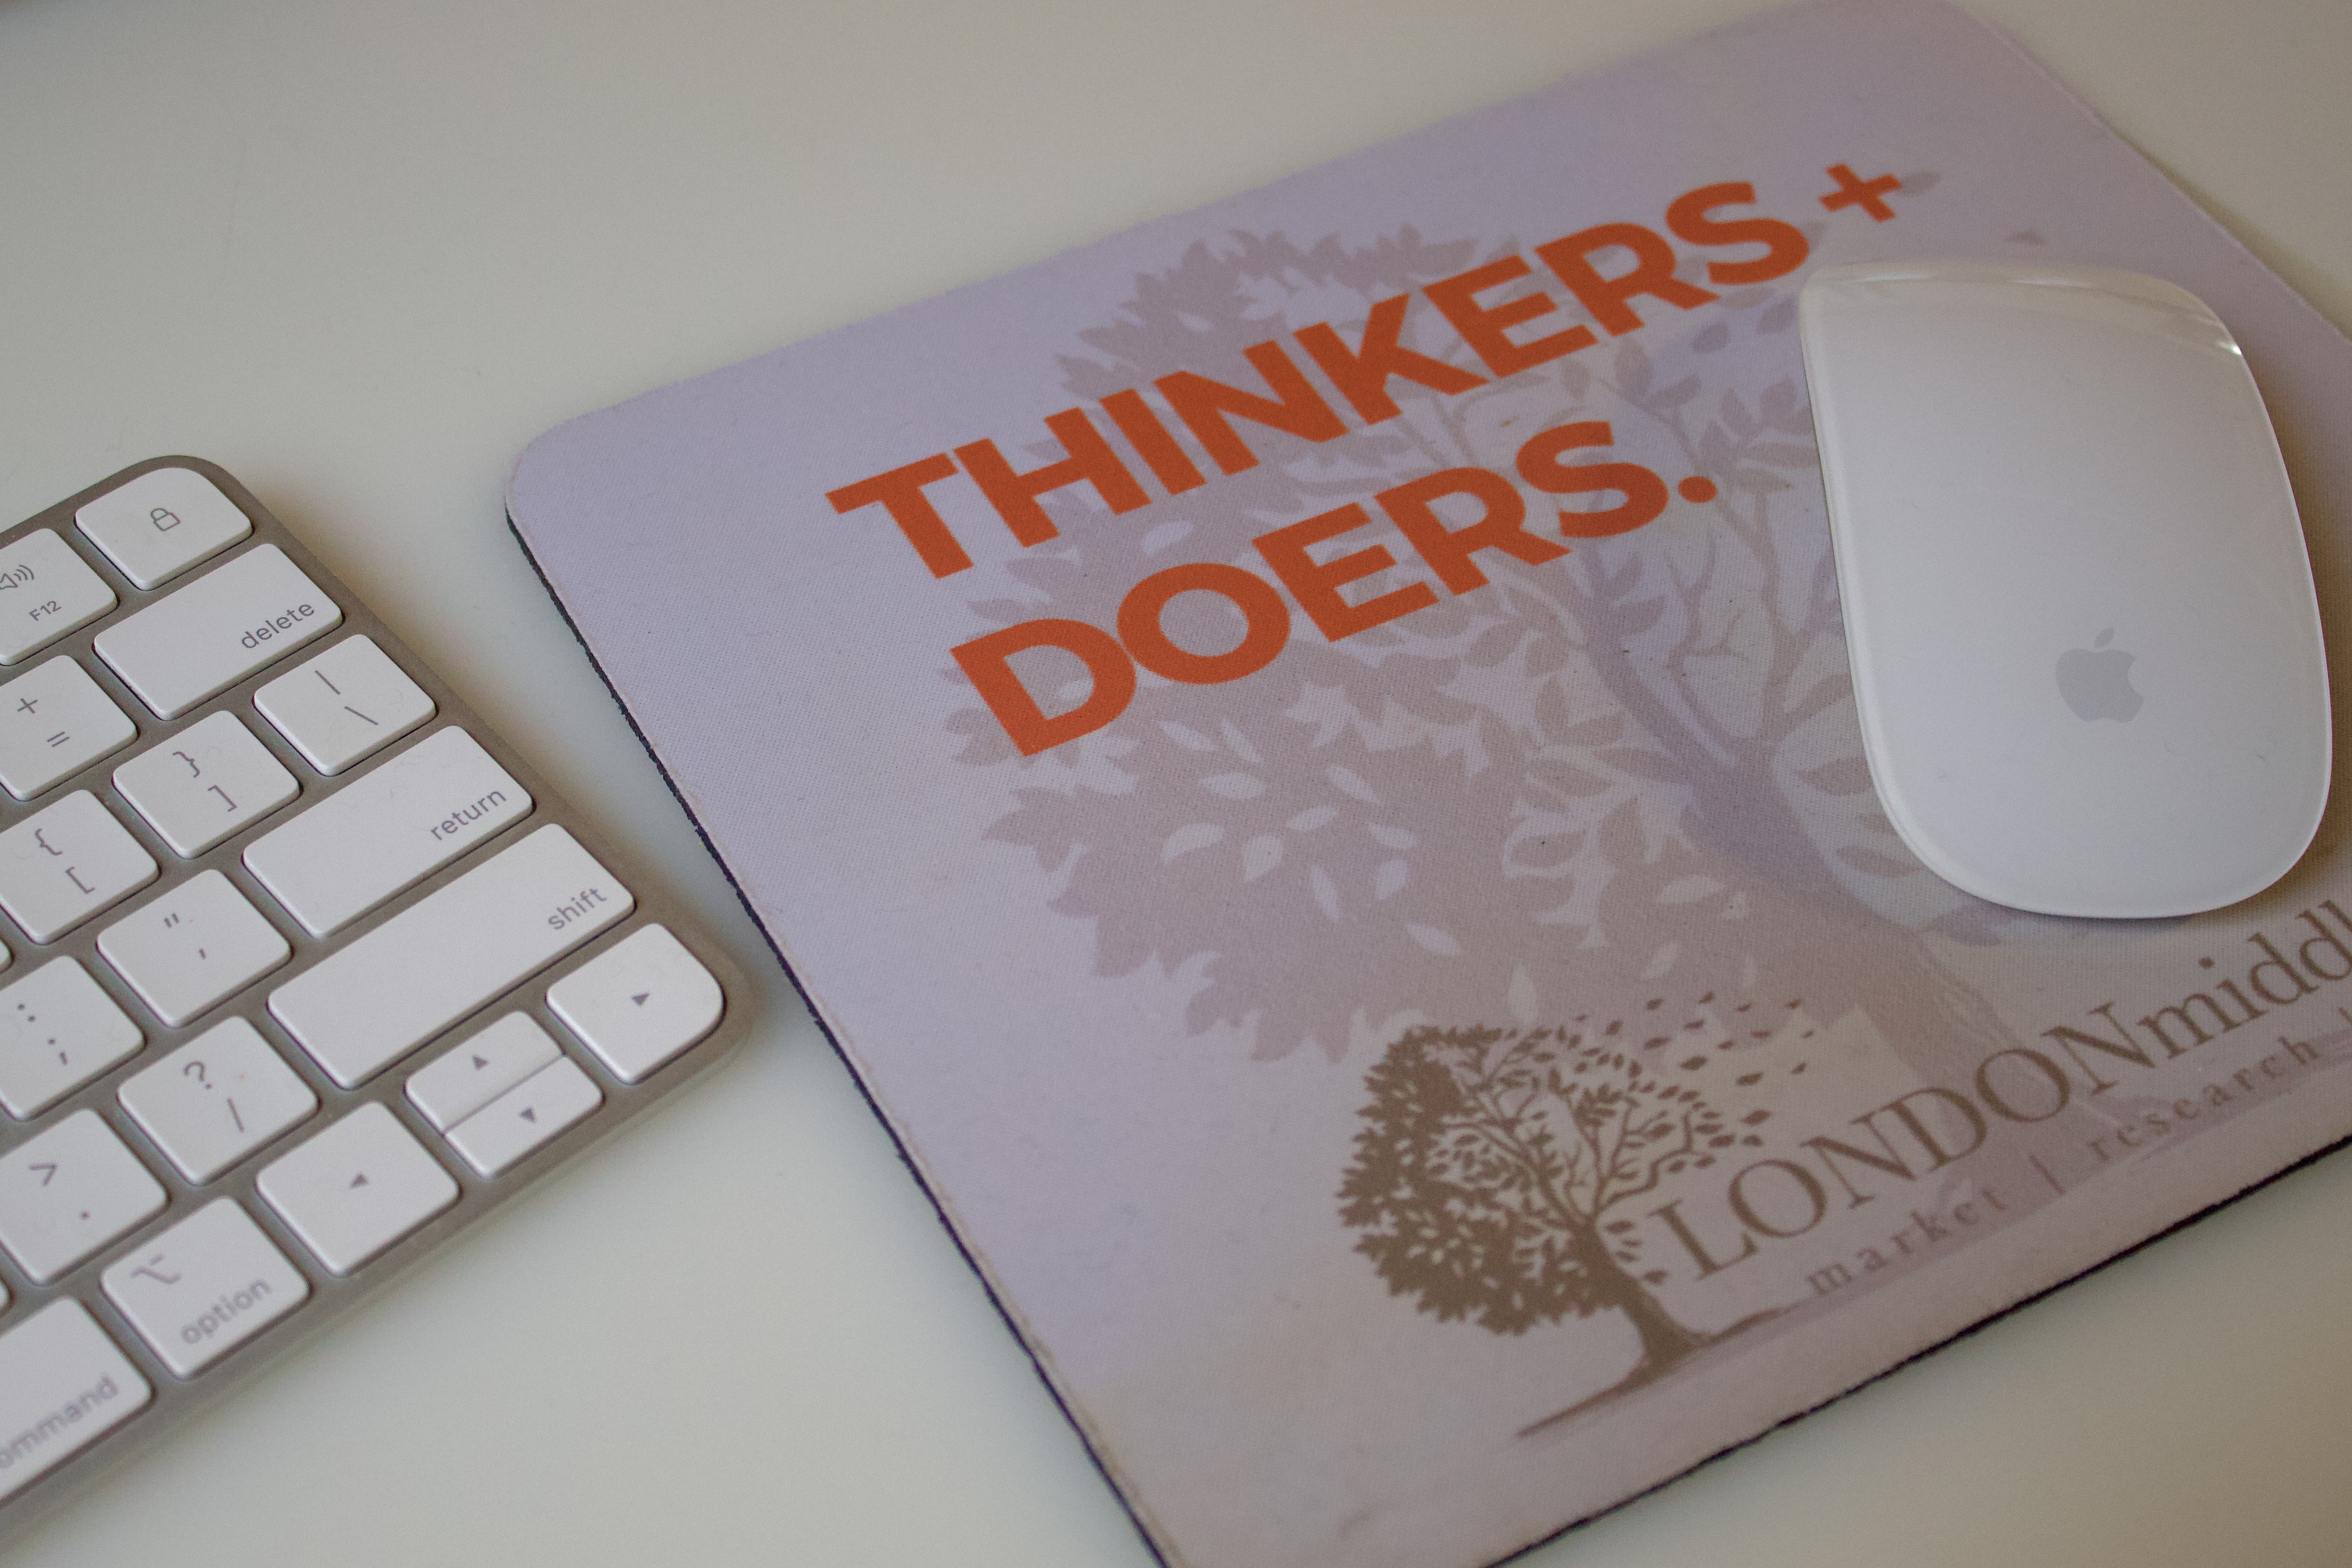 A mousepad with the words "Thinkers and Doers" written on the top